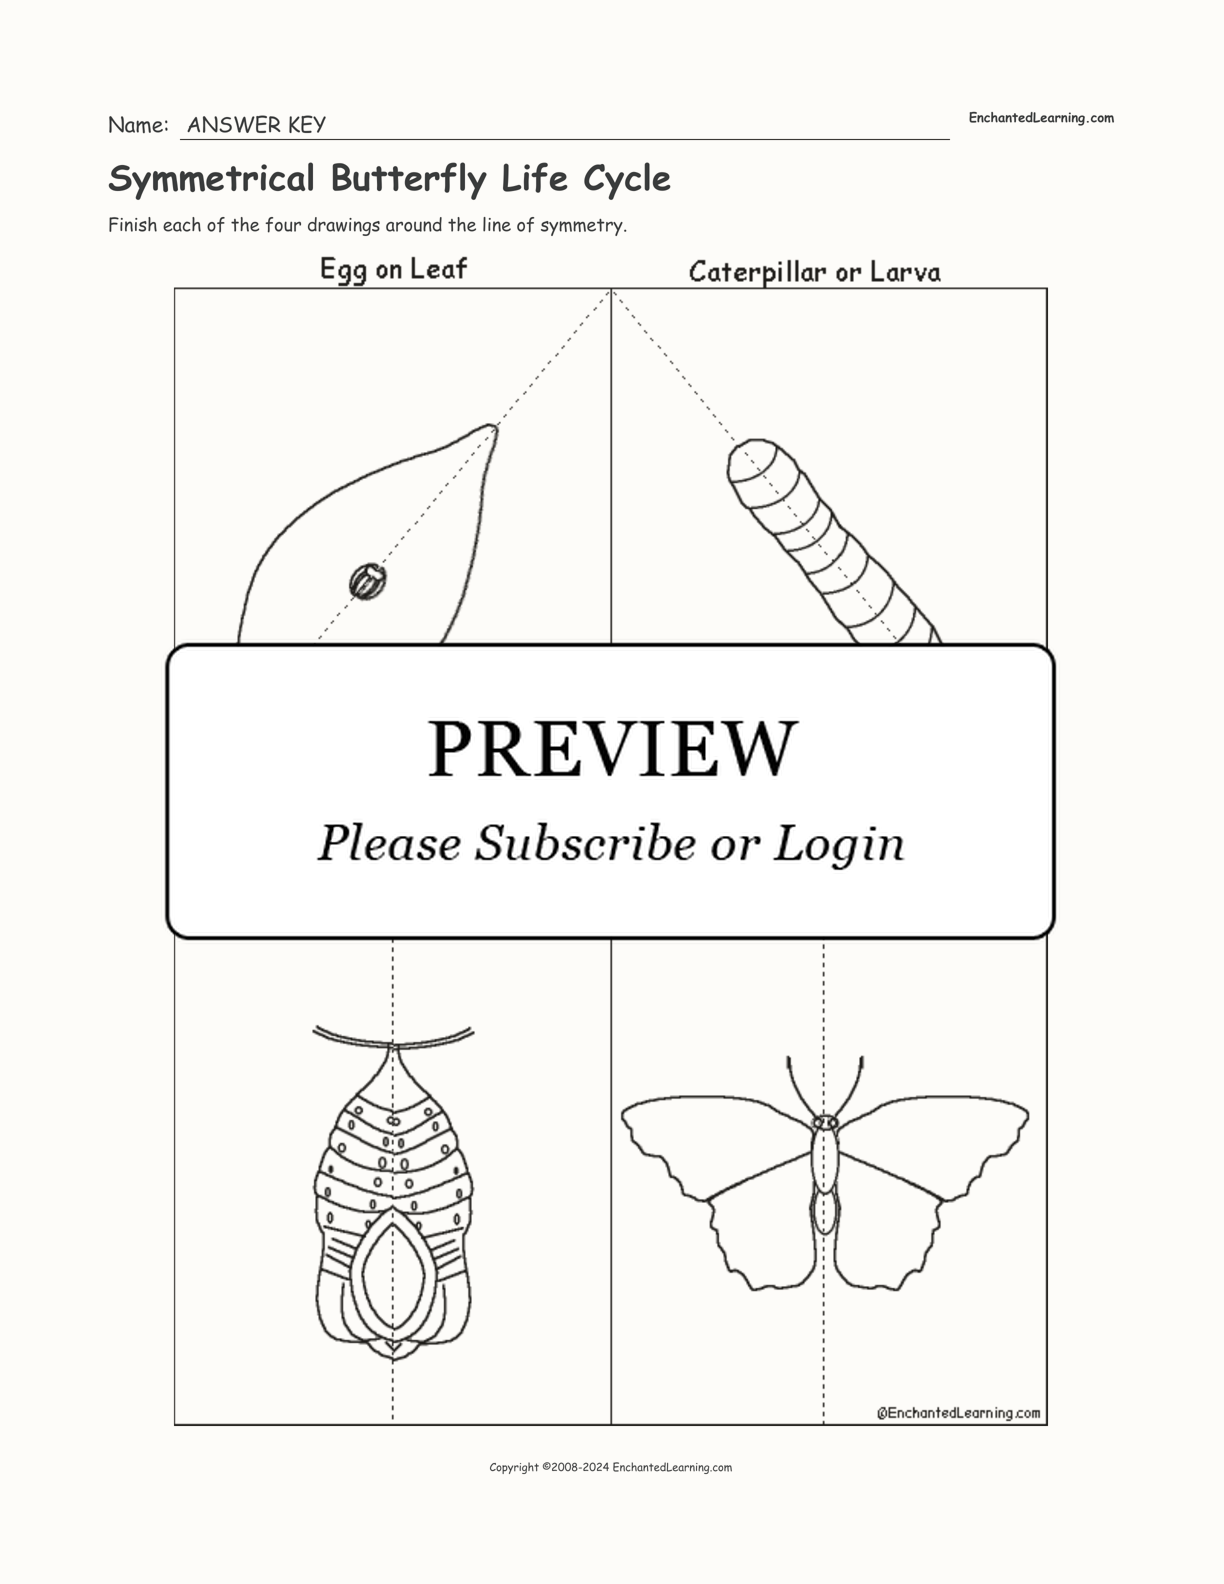 Symmetrical Butterfly Life Cycle interactive worksheet page 2